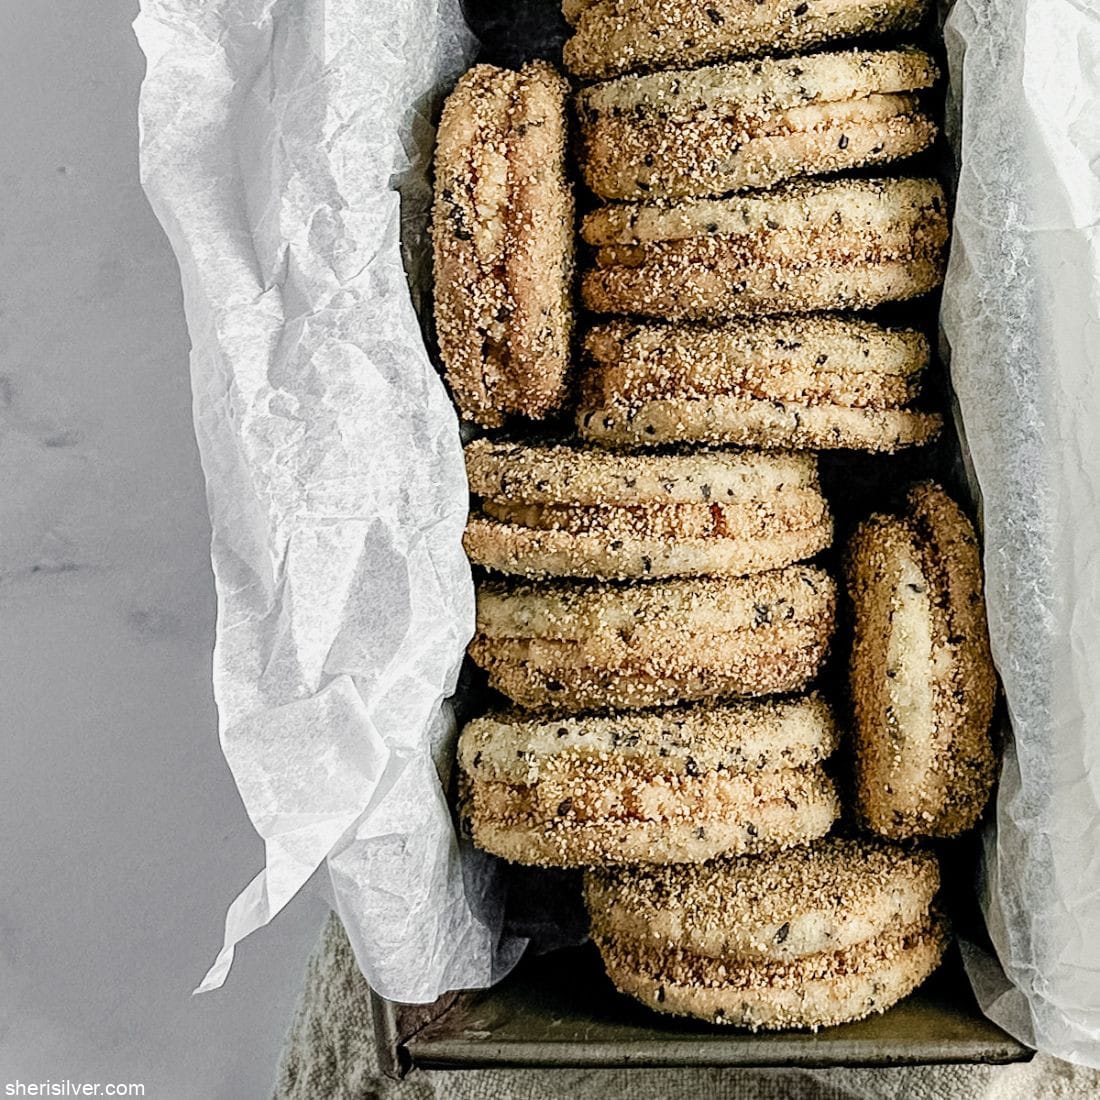 Sesame shortbread sandwich cookies with tahini frosting